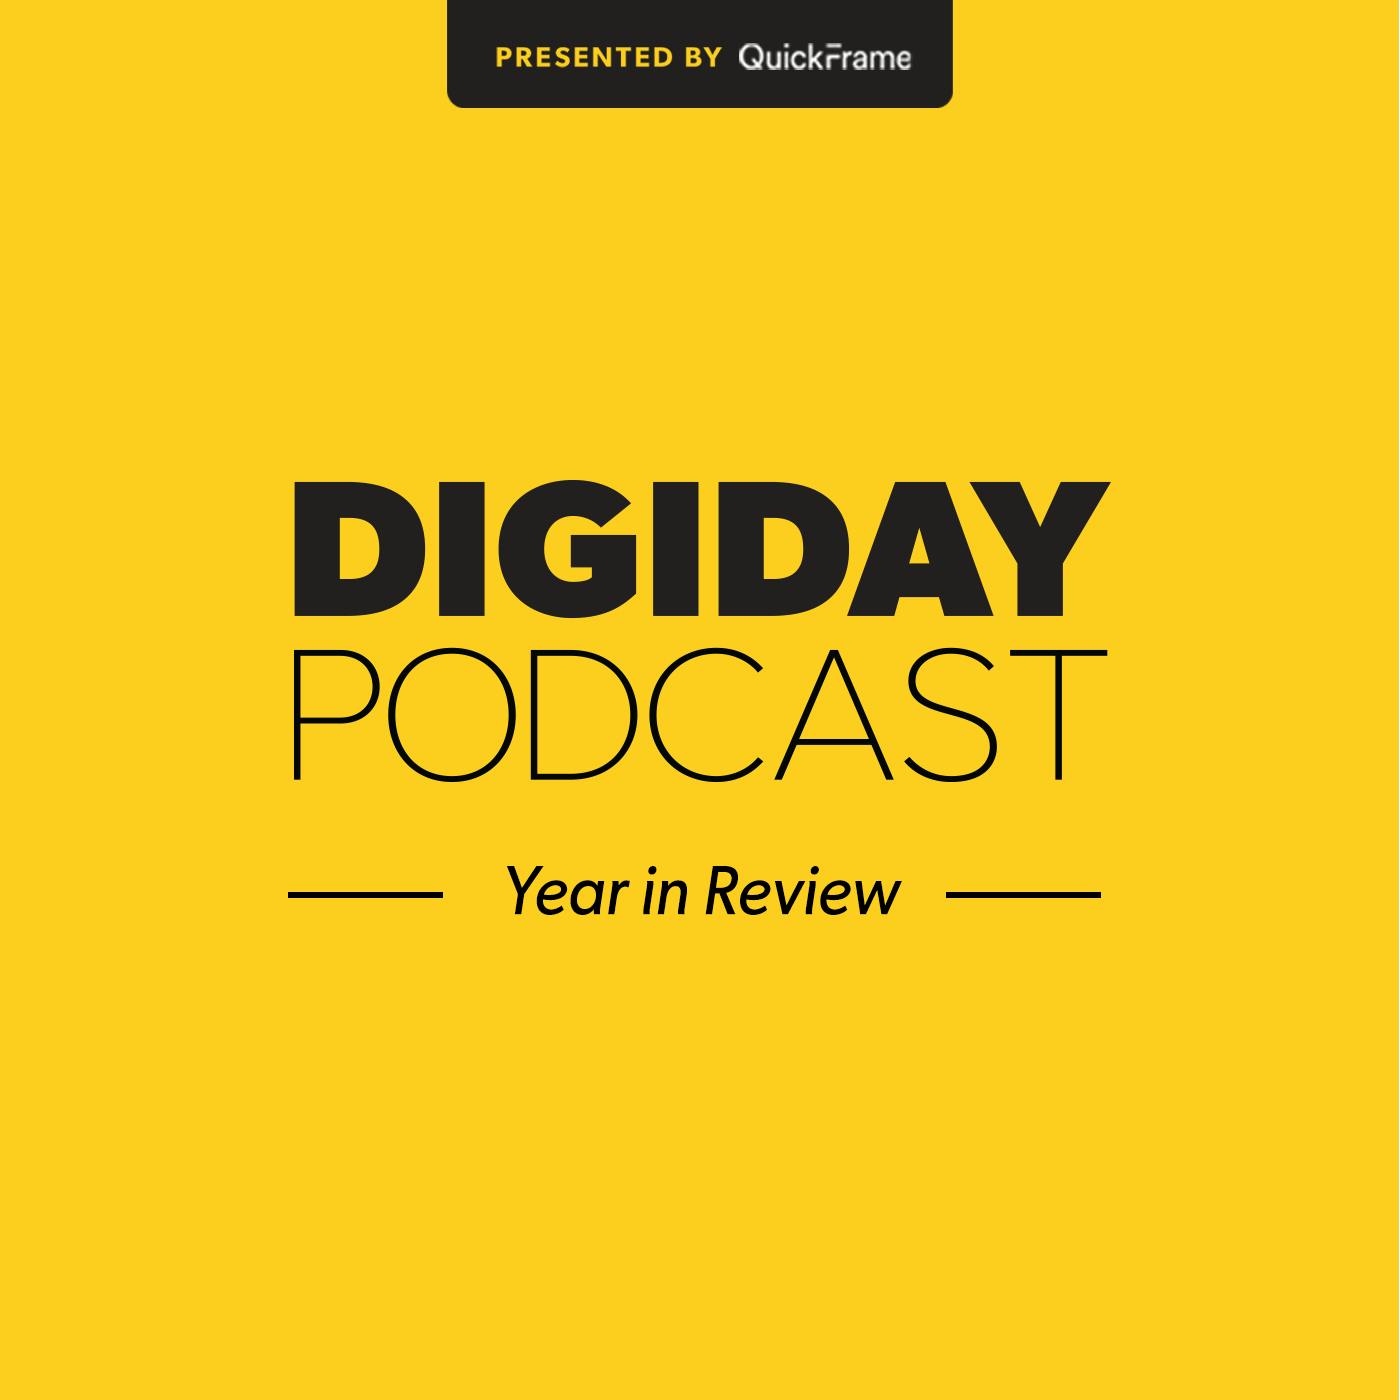 'The shine has definitely come off': Digiday's top takeaways from 2022